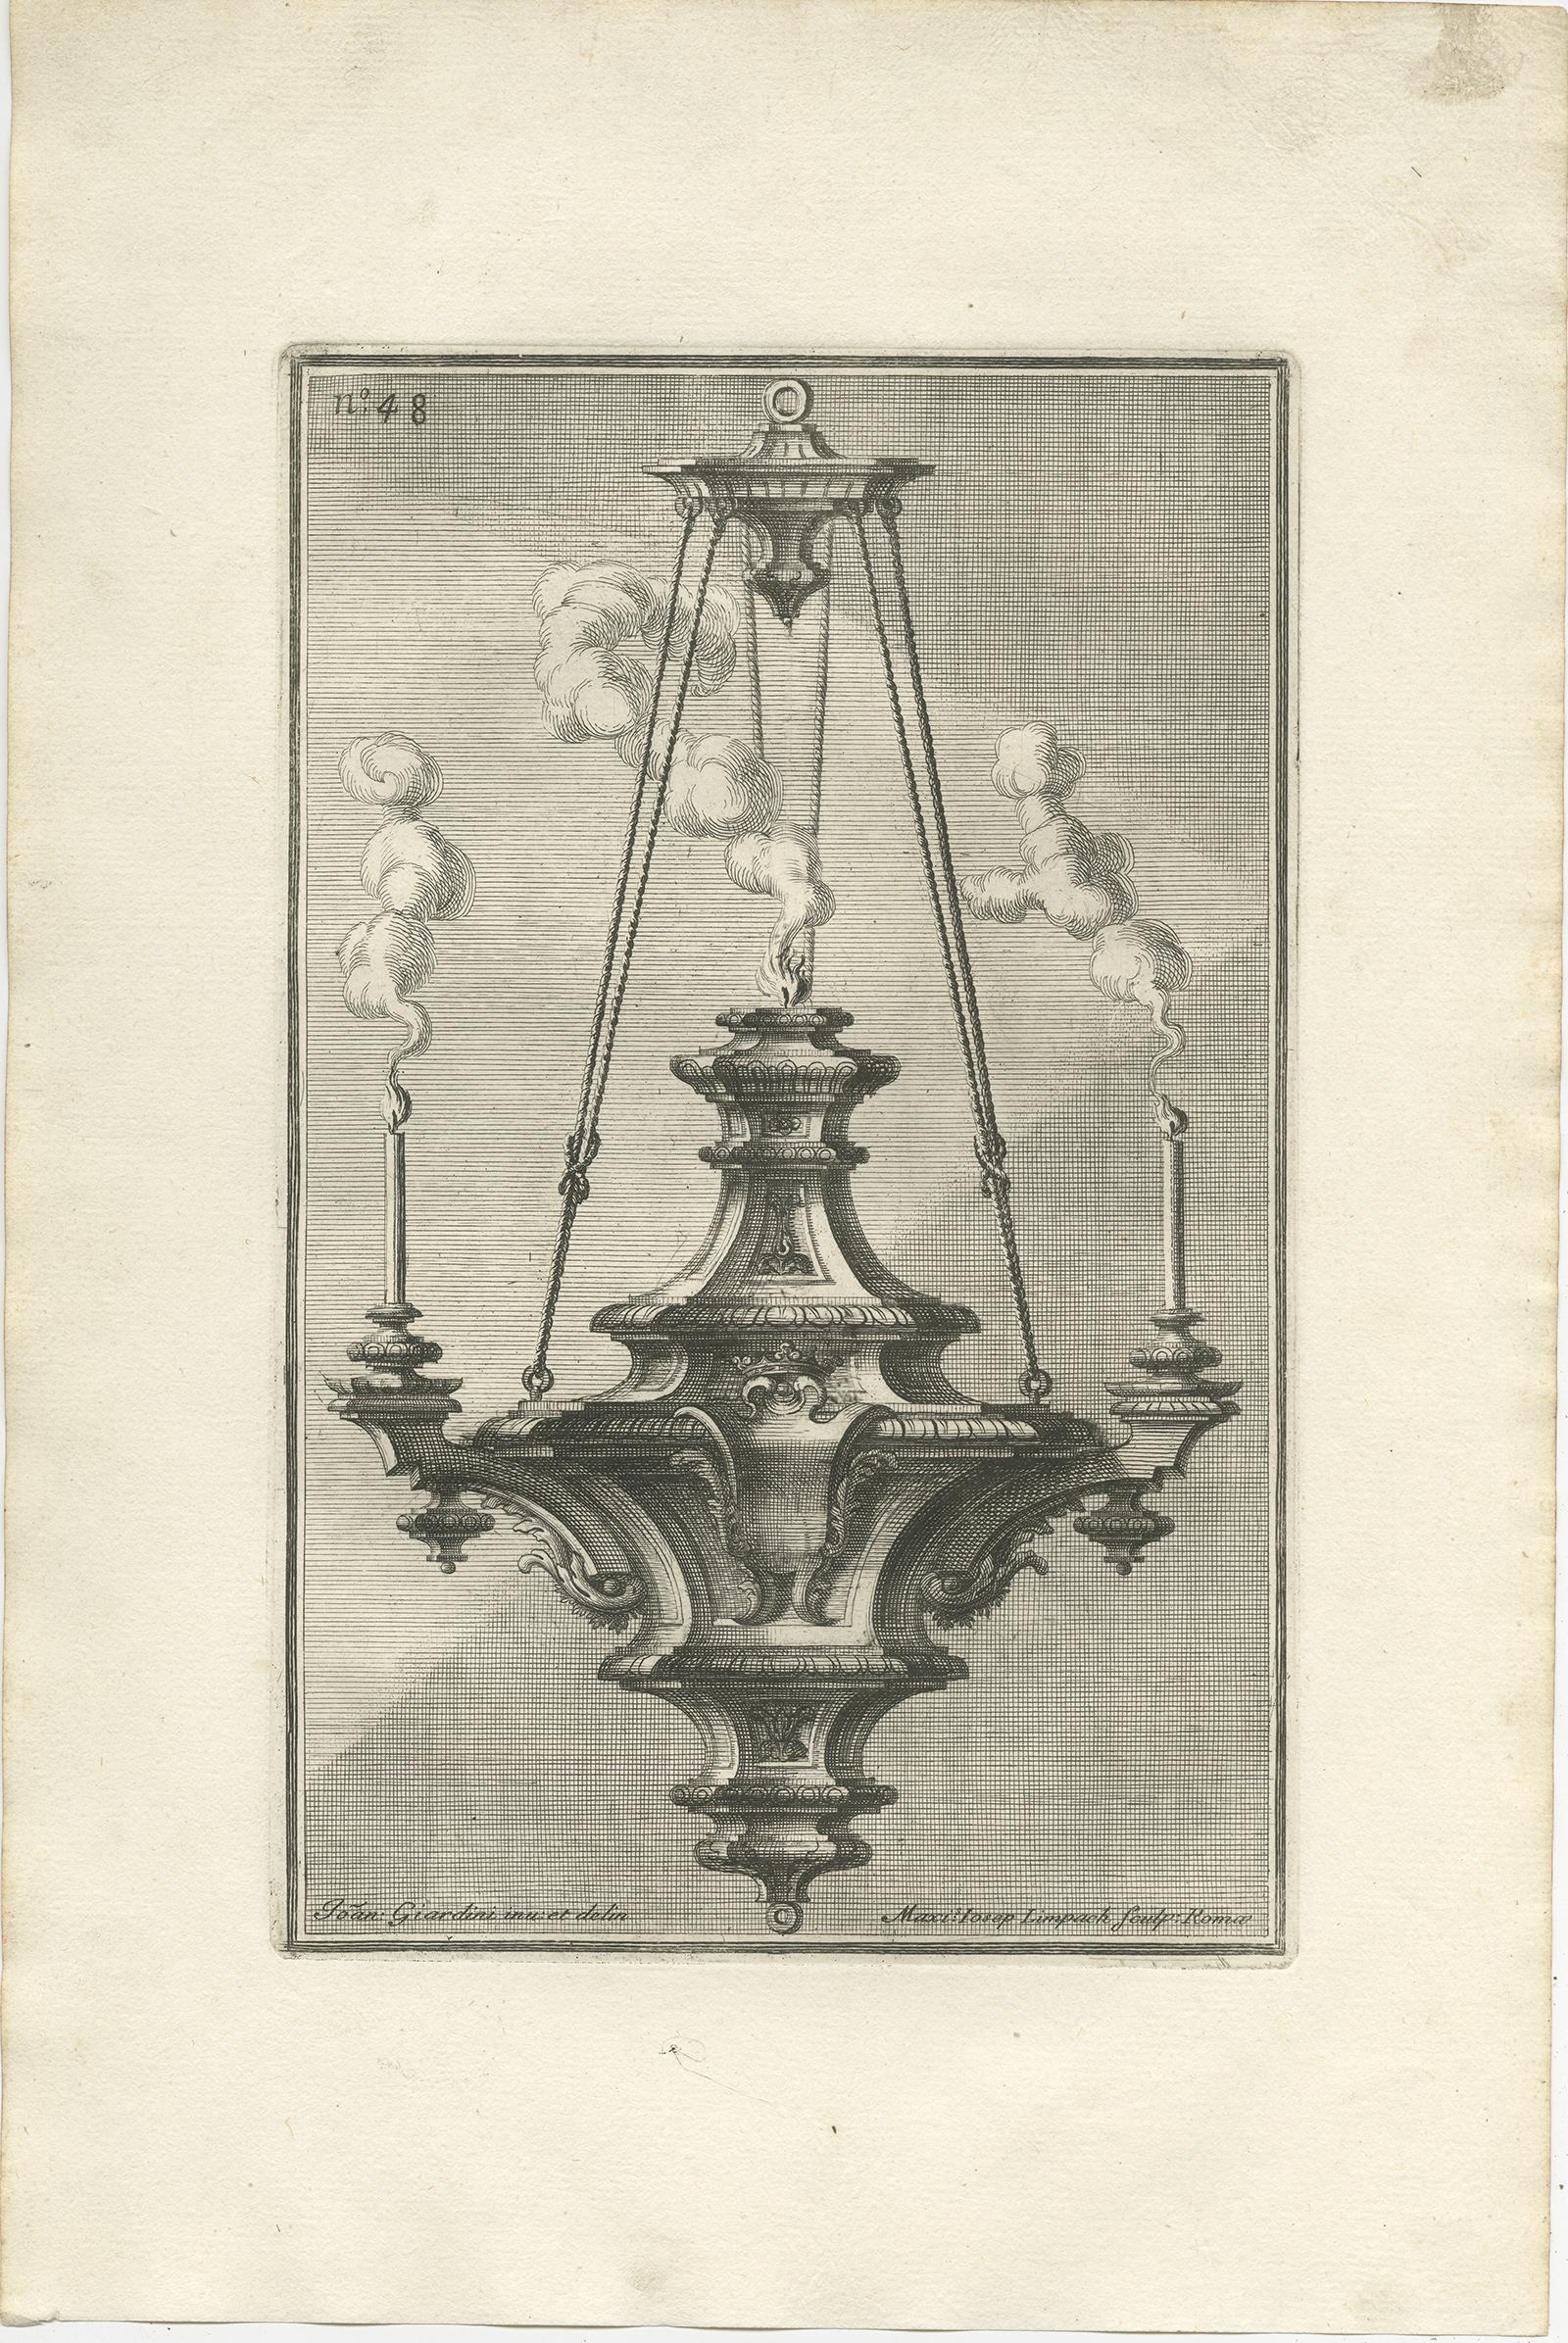 Set of 10 Antique Prints of Designs of Chandeliers, Ornaments and Decorations 1